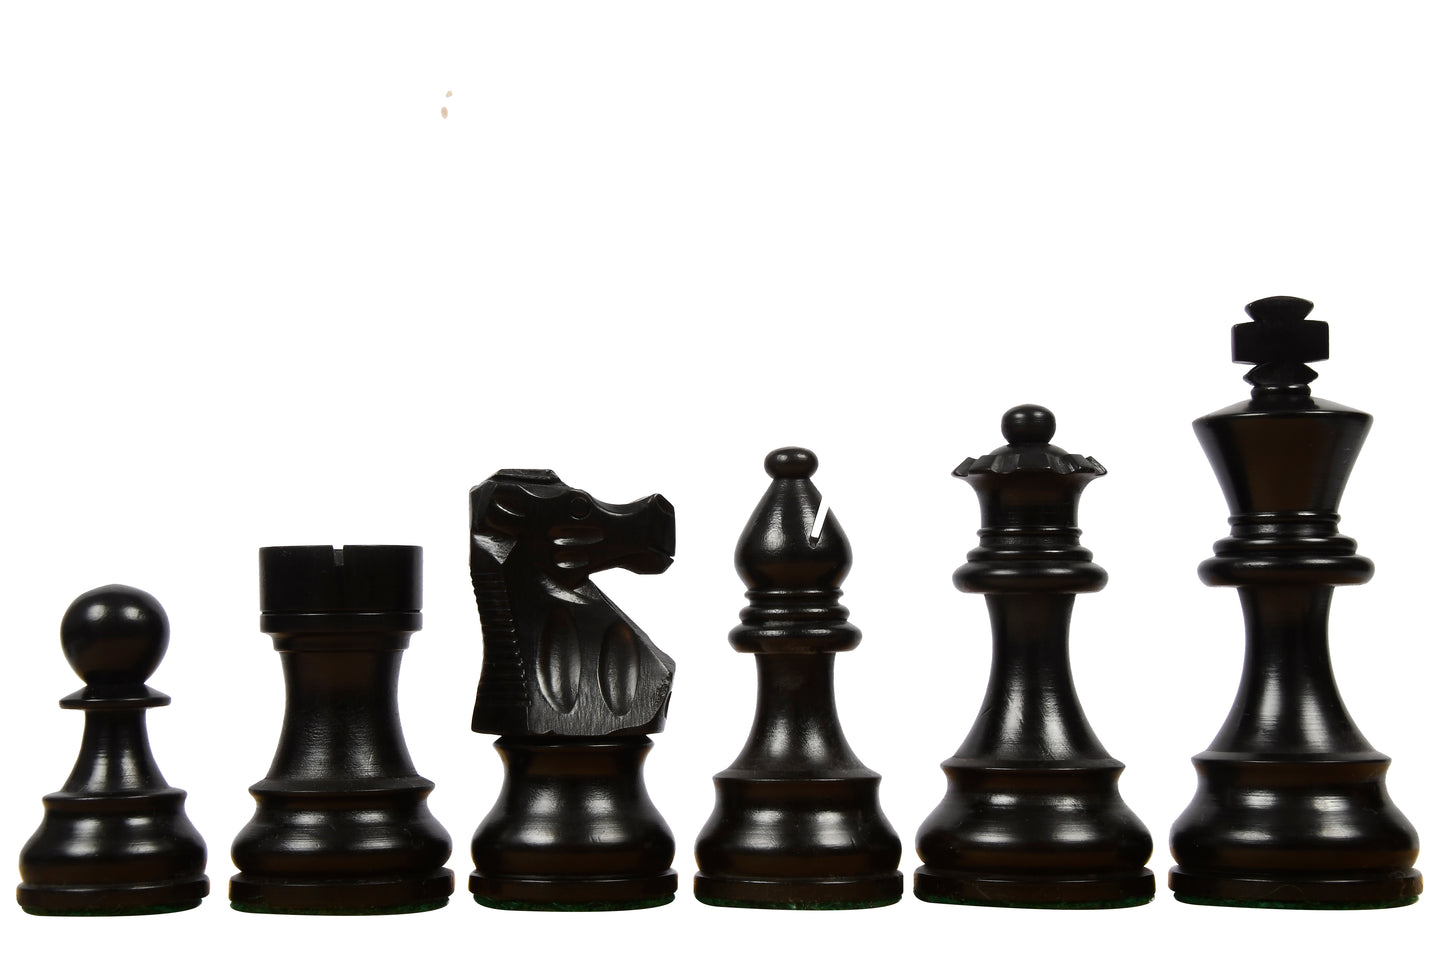 Reproduced French Lardy Exclusive Wooden Chess Pieces in Ebonized Boxwood & Natural Boxwood - 3.75" Extra Queen